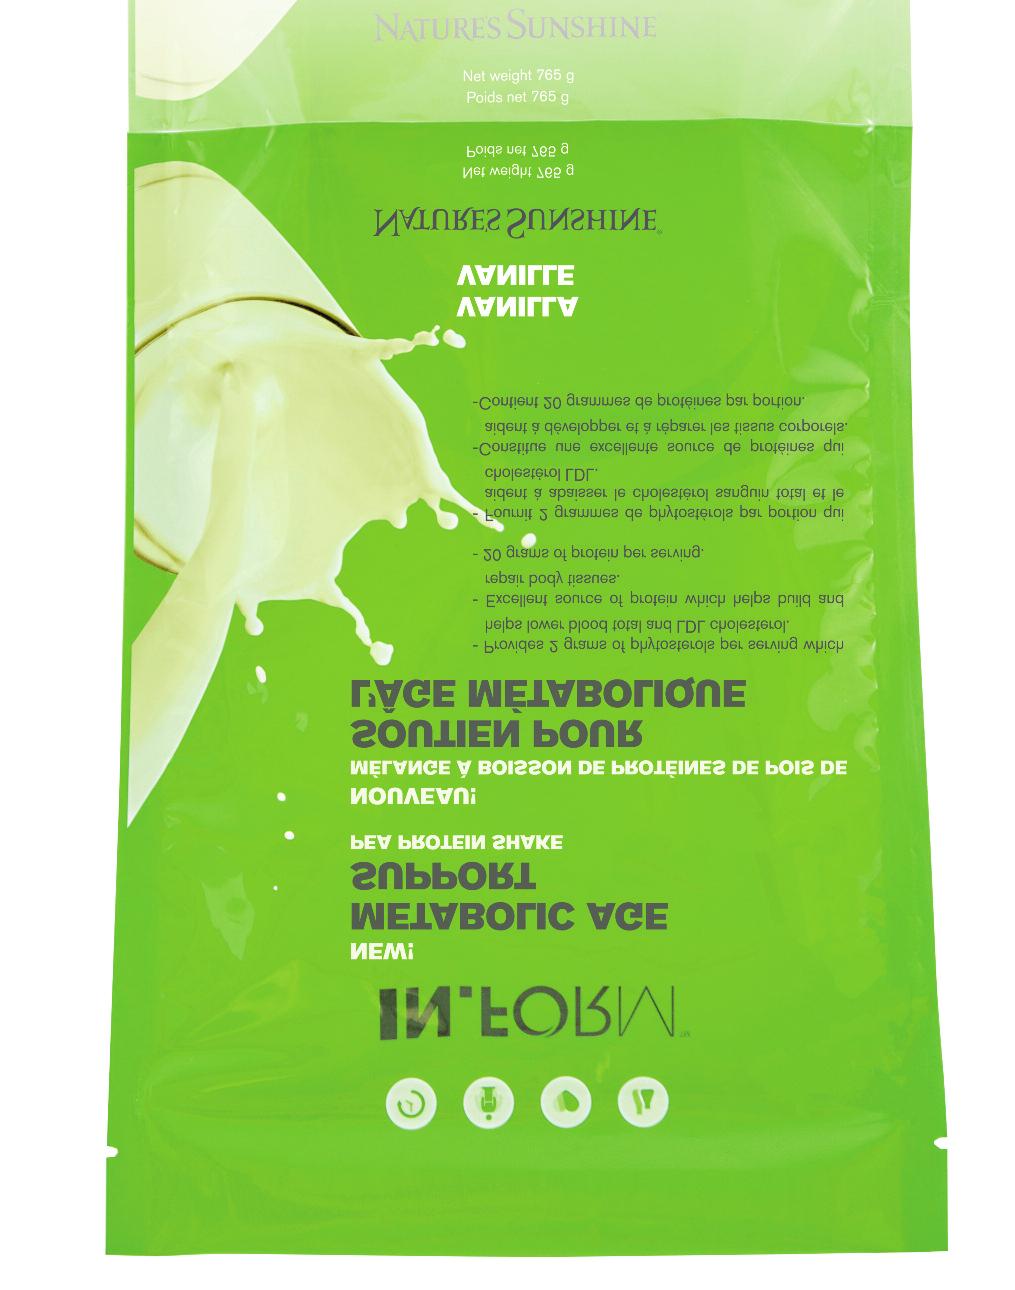 Pea Protein Shake NPN 80069040, 765g bag IN.FORM Metabolic Age Support Pea Protein Shake, Stock No. 3095 The IN.